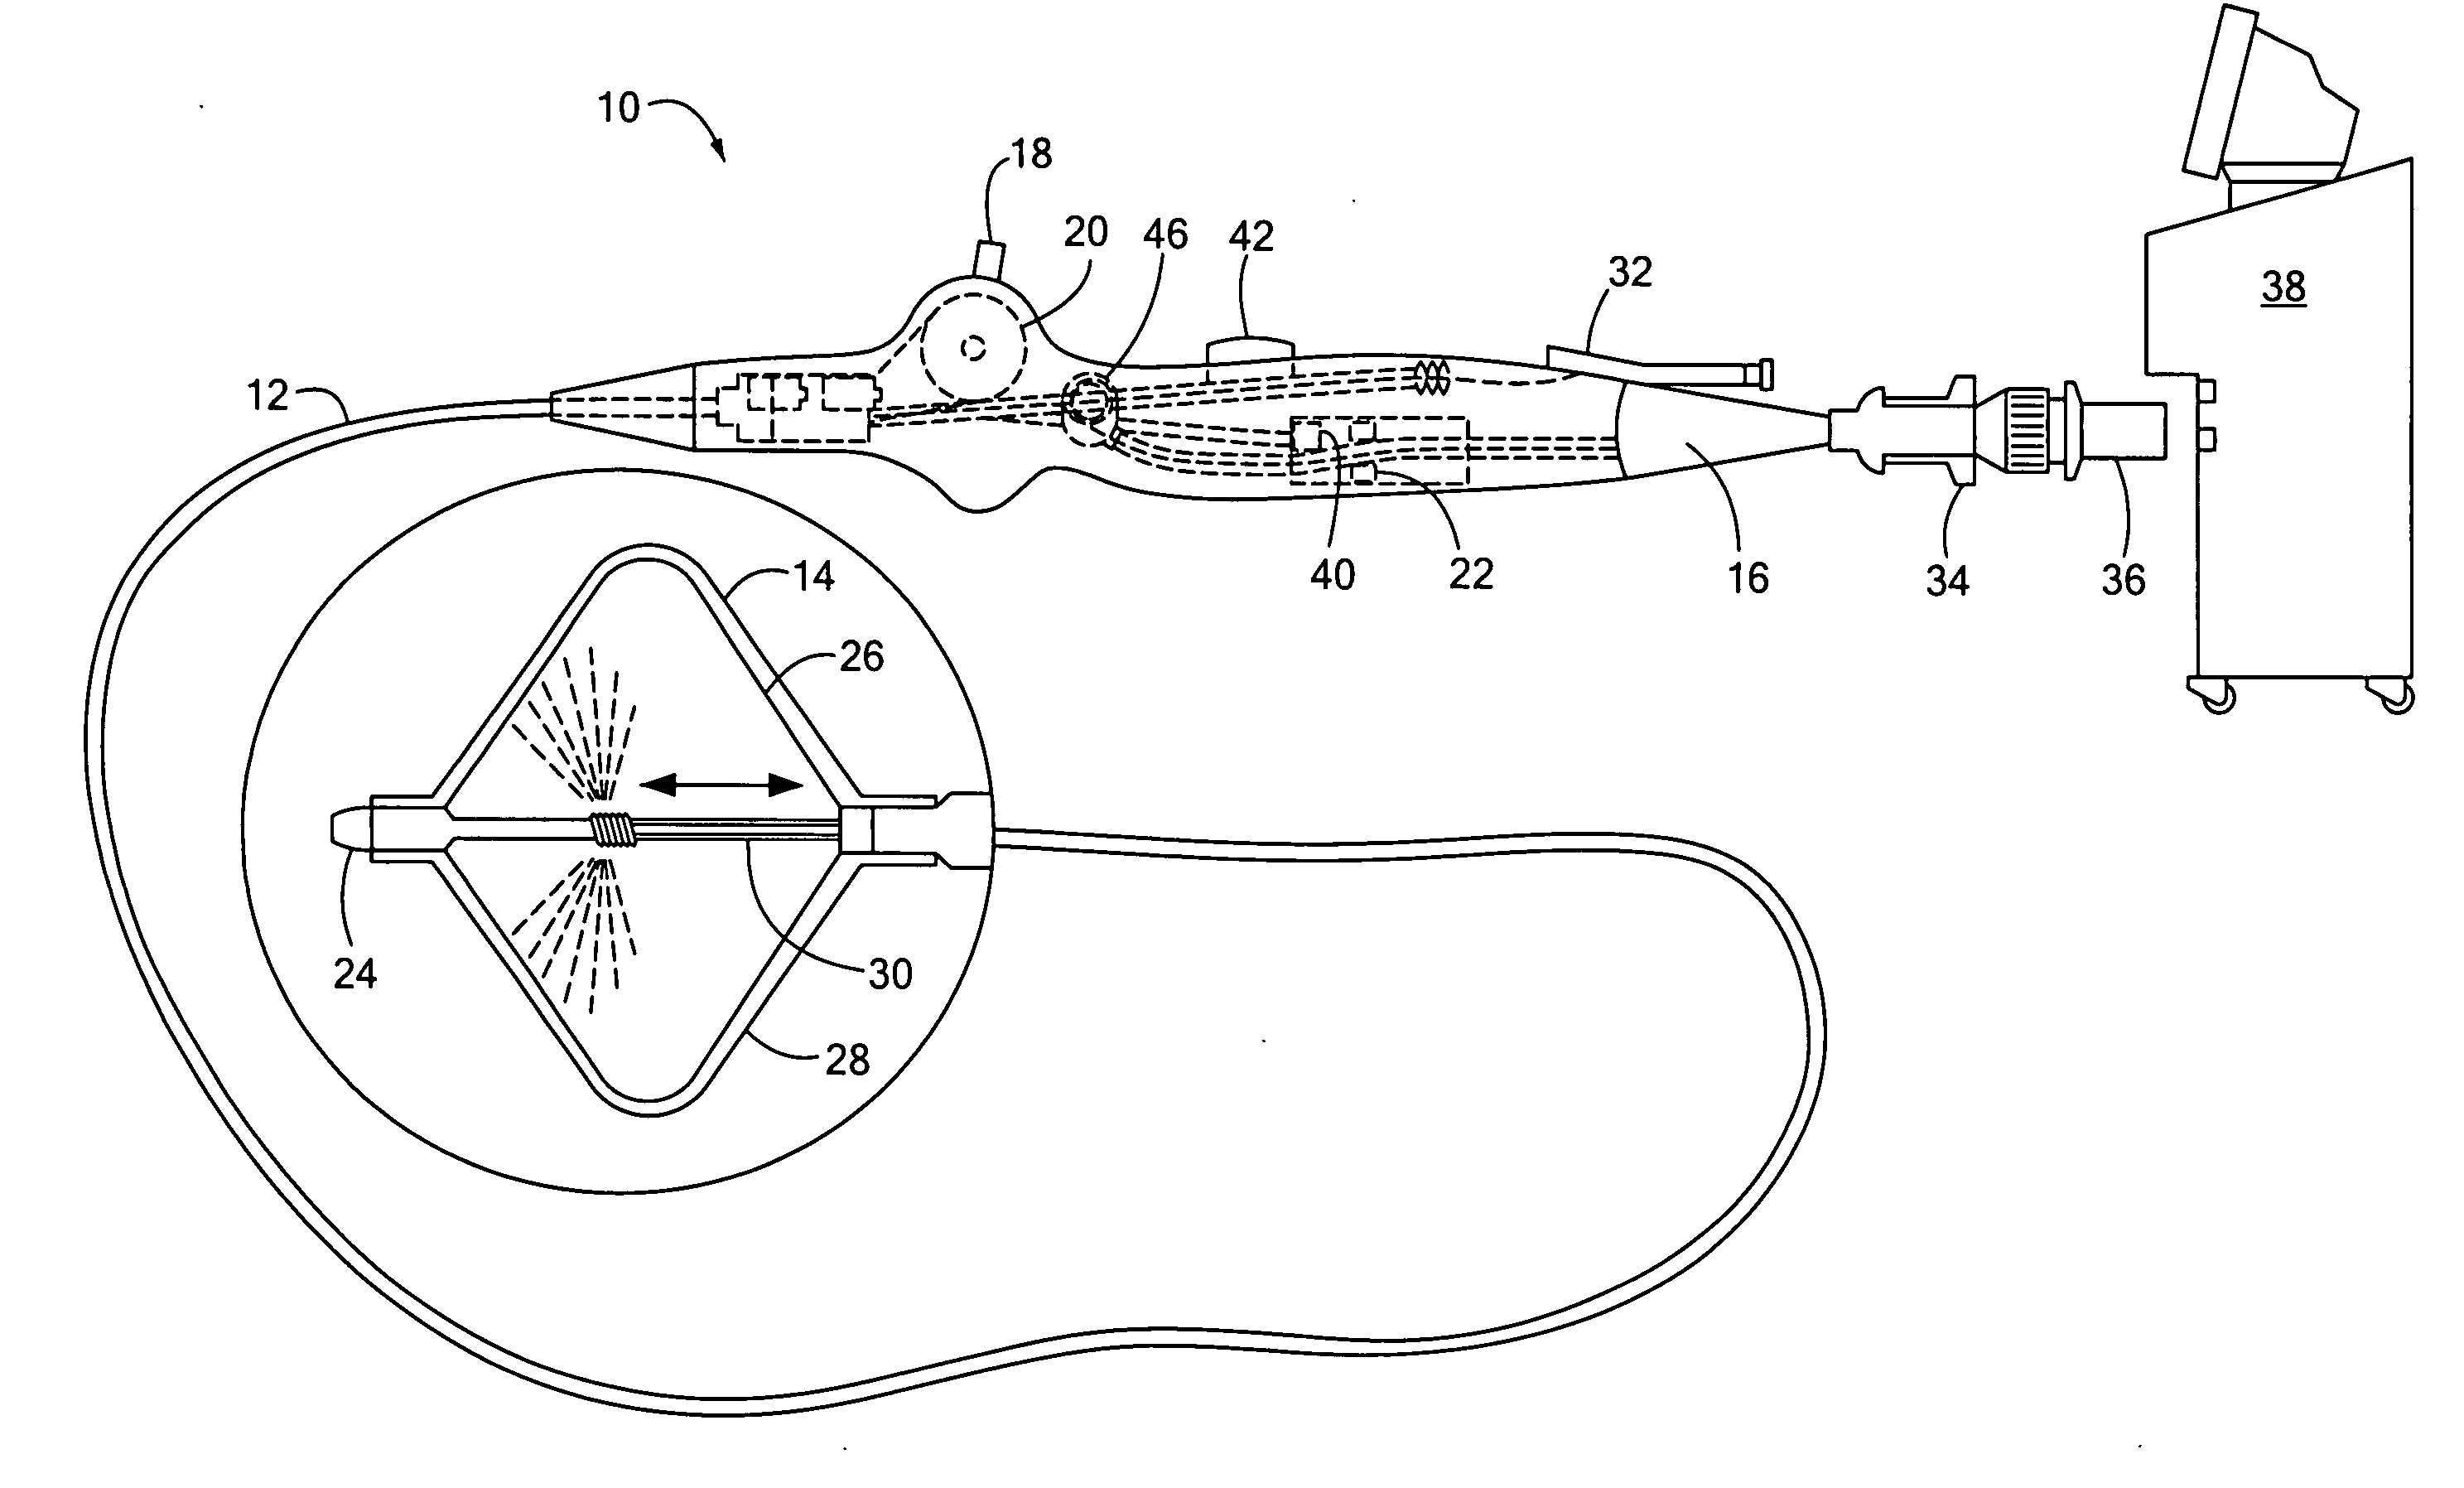 Distal cooling distribution system for a medical device